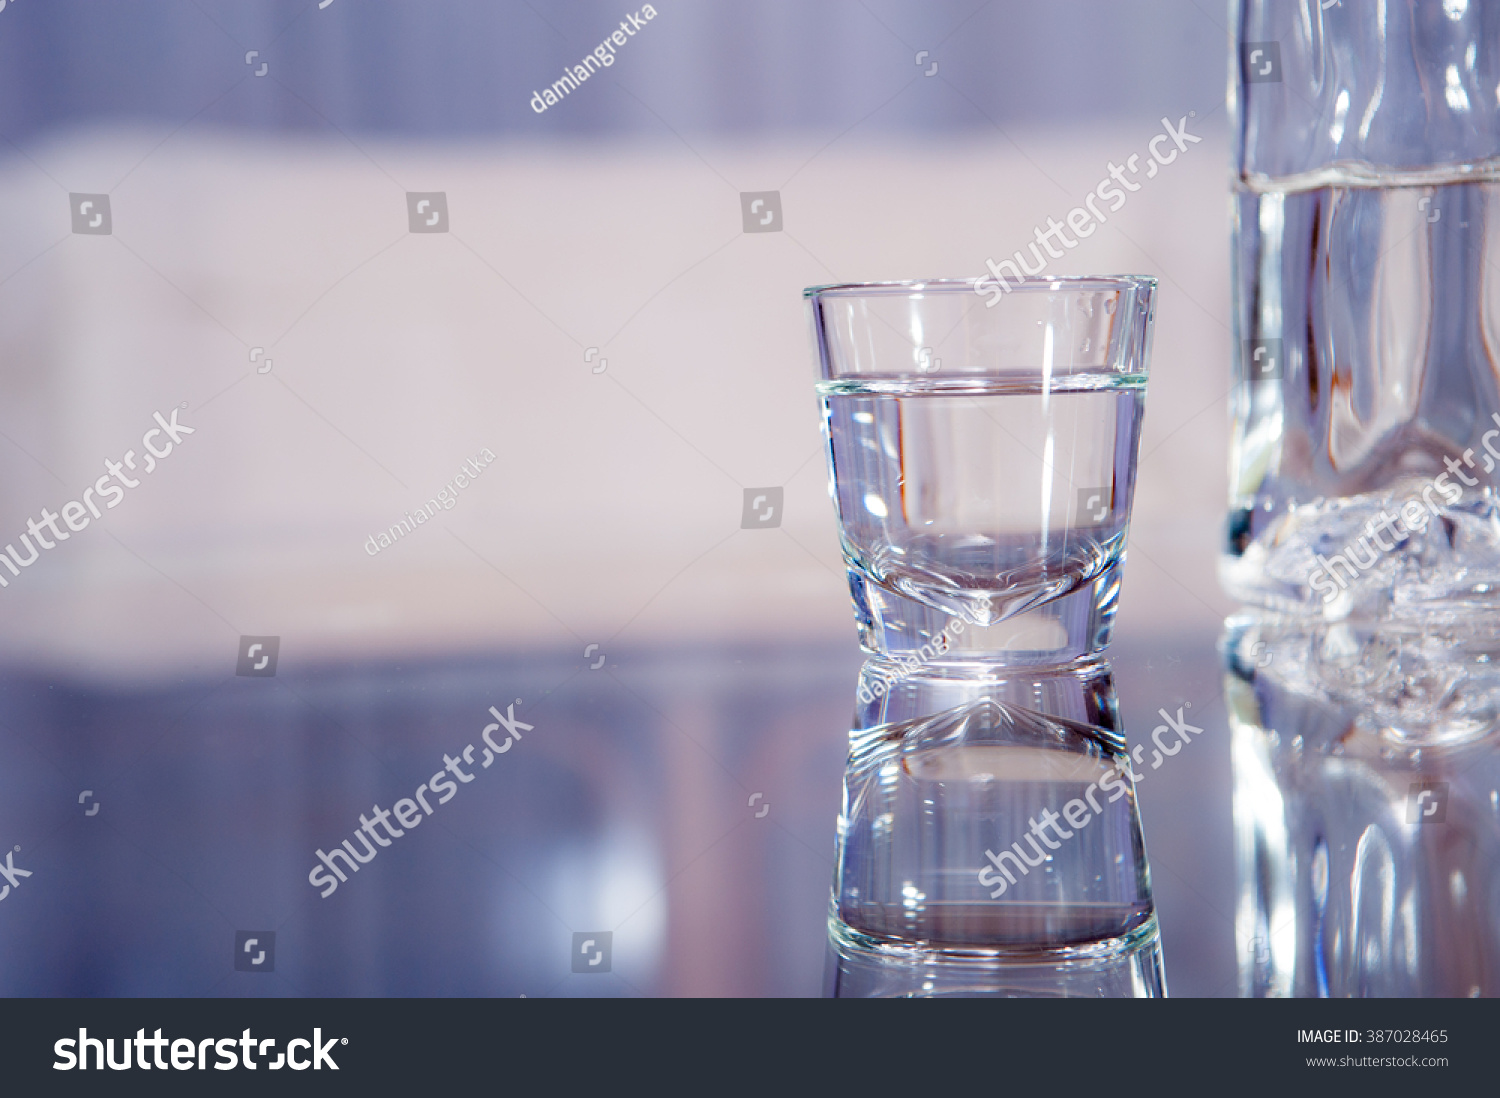 A vodka glass with a bottle standing on the glass table / vodka glass #387028465